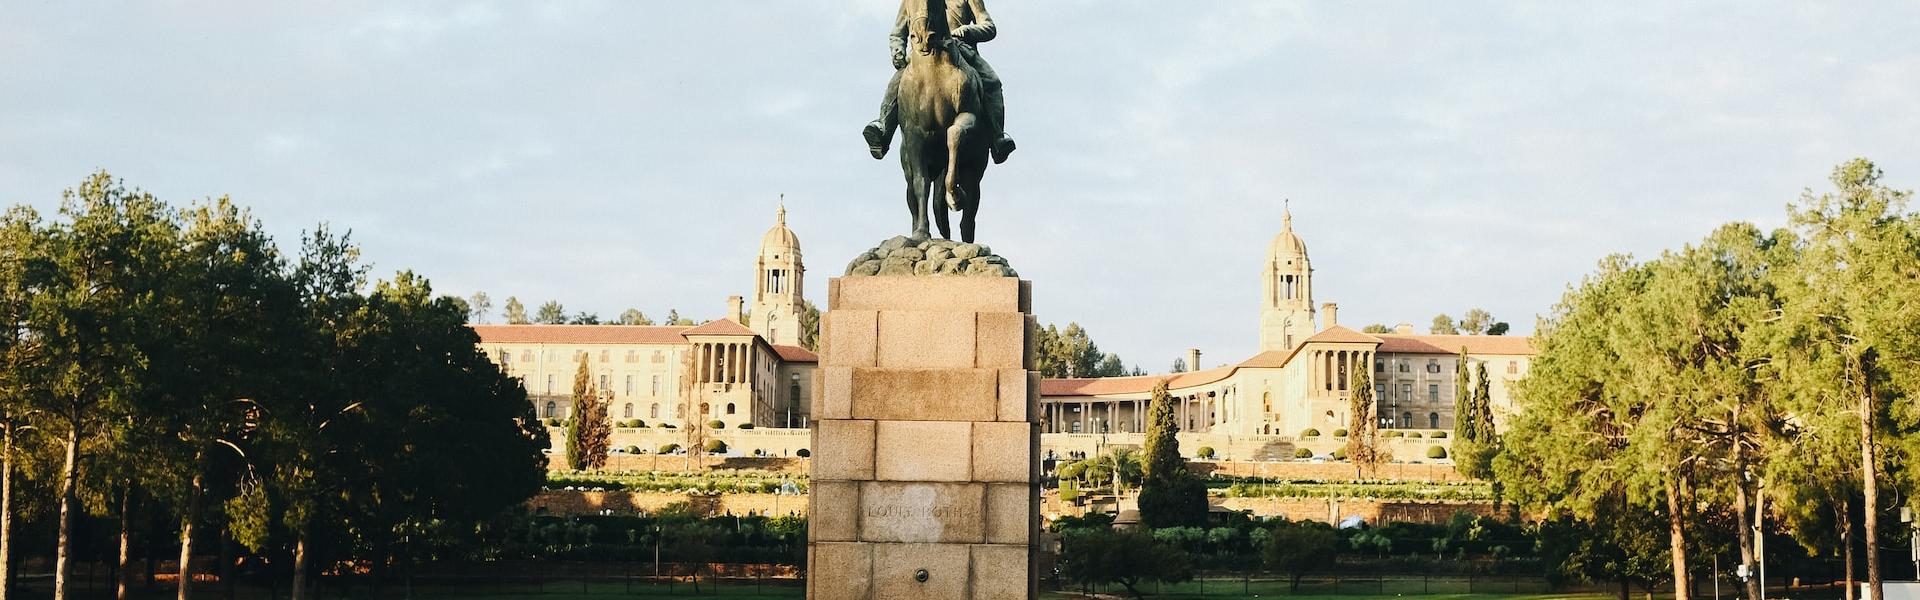 A statue of Louis Botha at the Union Buildings in Pretoria, South Africa.